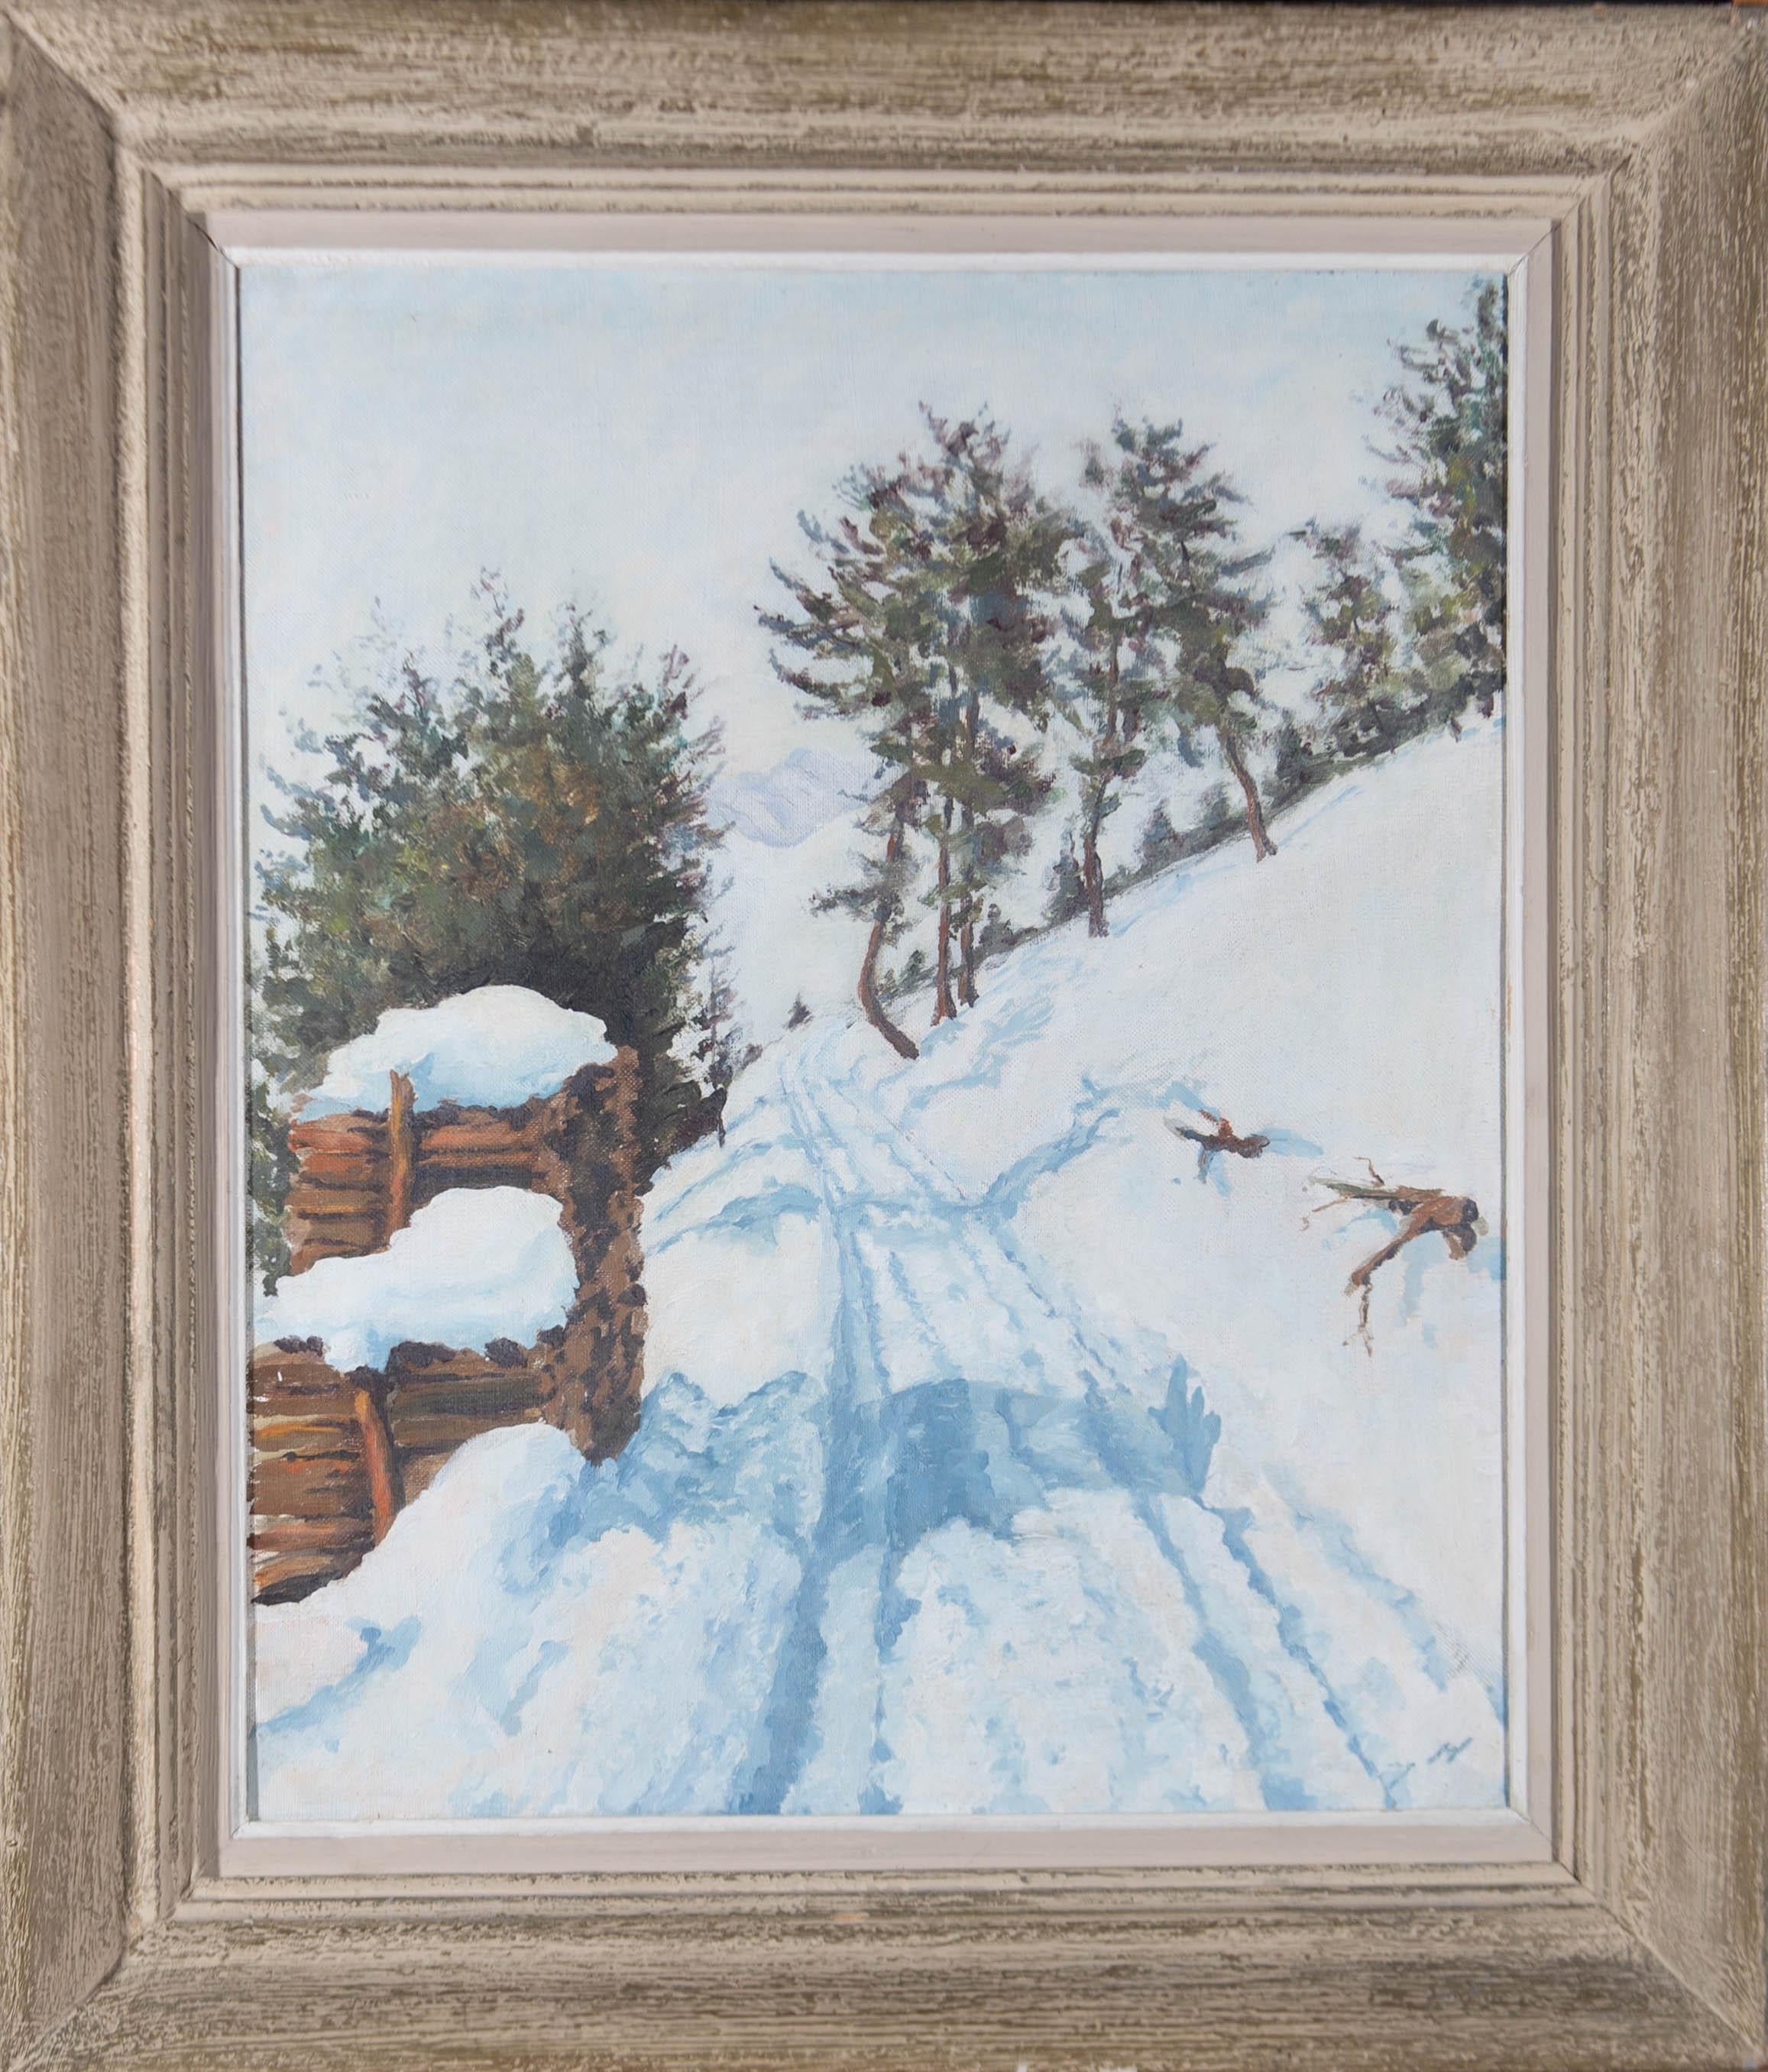 A picturesque winter landscape showing a well worn path leading into the distance amongst the trees with a view of the mountains ahead. Well presented in a wooden frame and slip. Signed and dated to the reverse. On canvas on stretchers.
